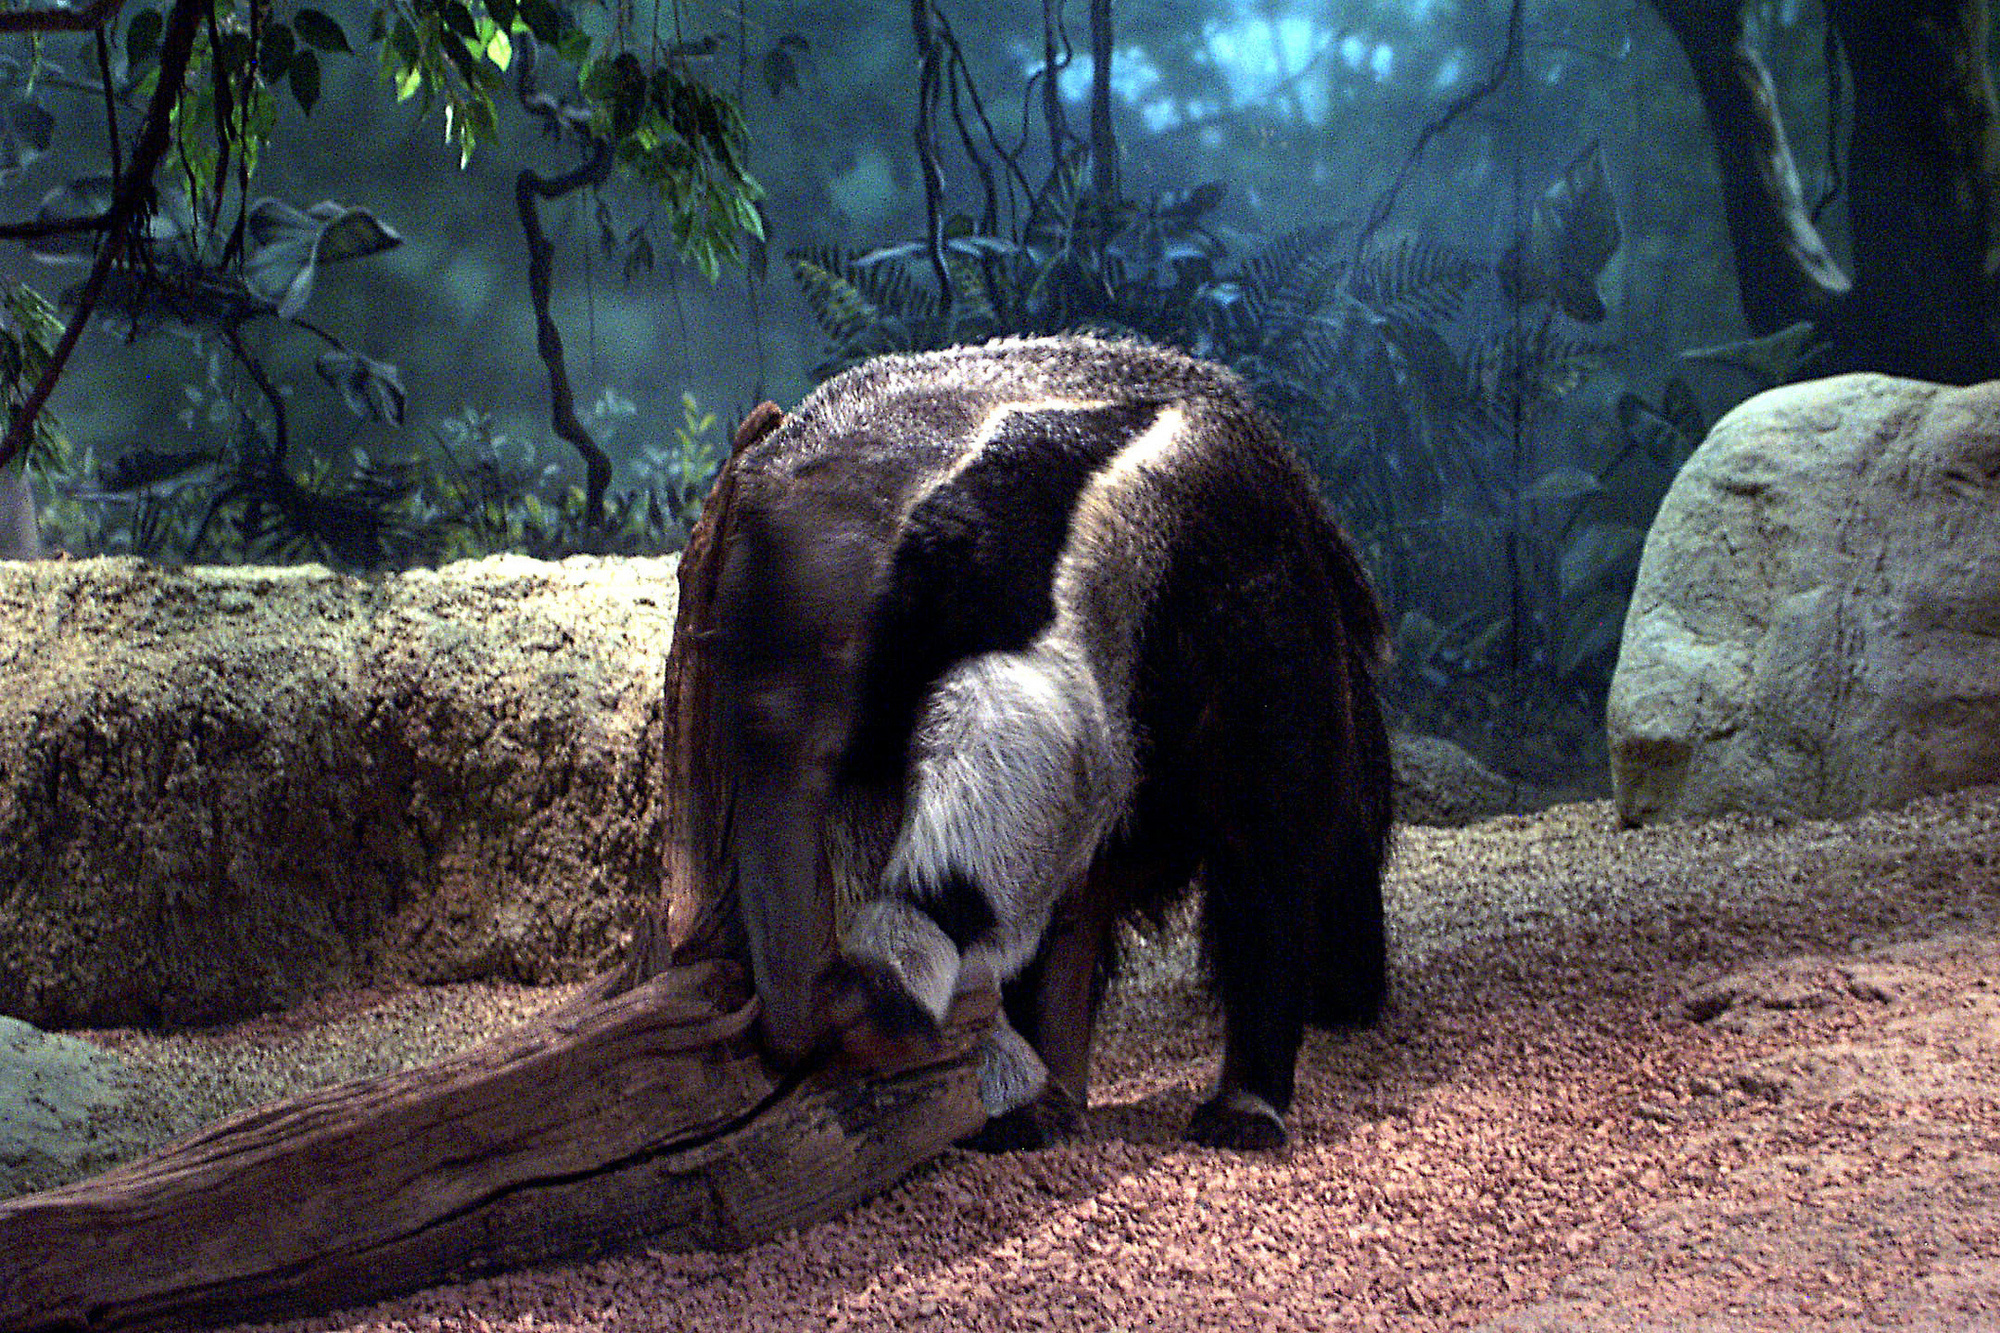 Did you know that an anteater puts away around 35,000 termites and ants each day?